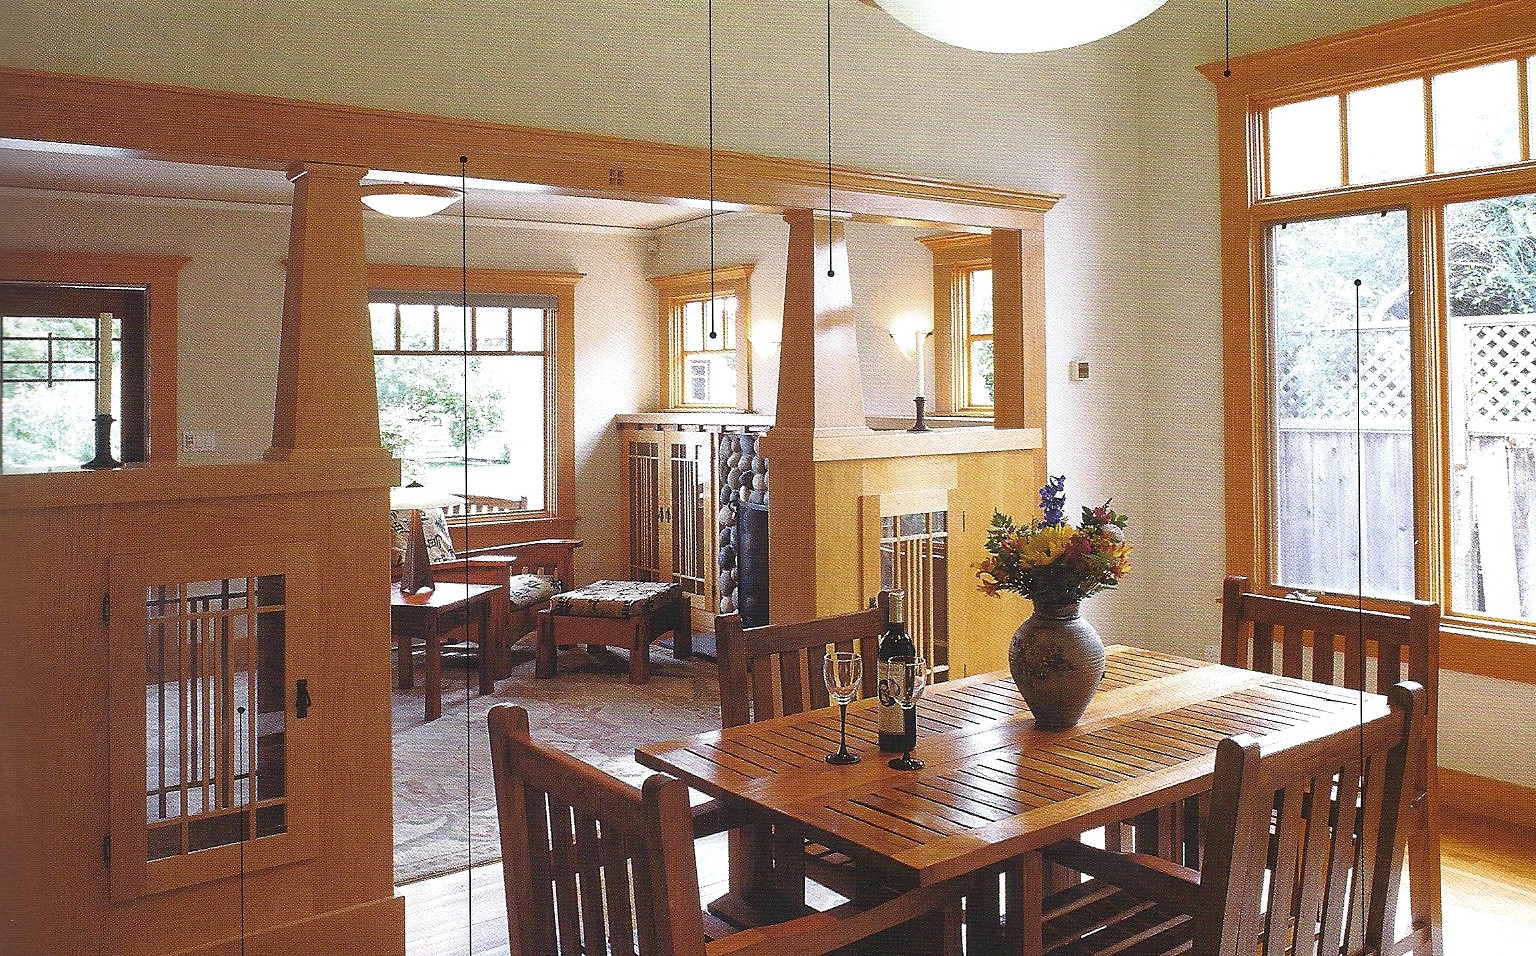 Craftsman Bungalow Style Homes Interior I Cut Down The